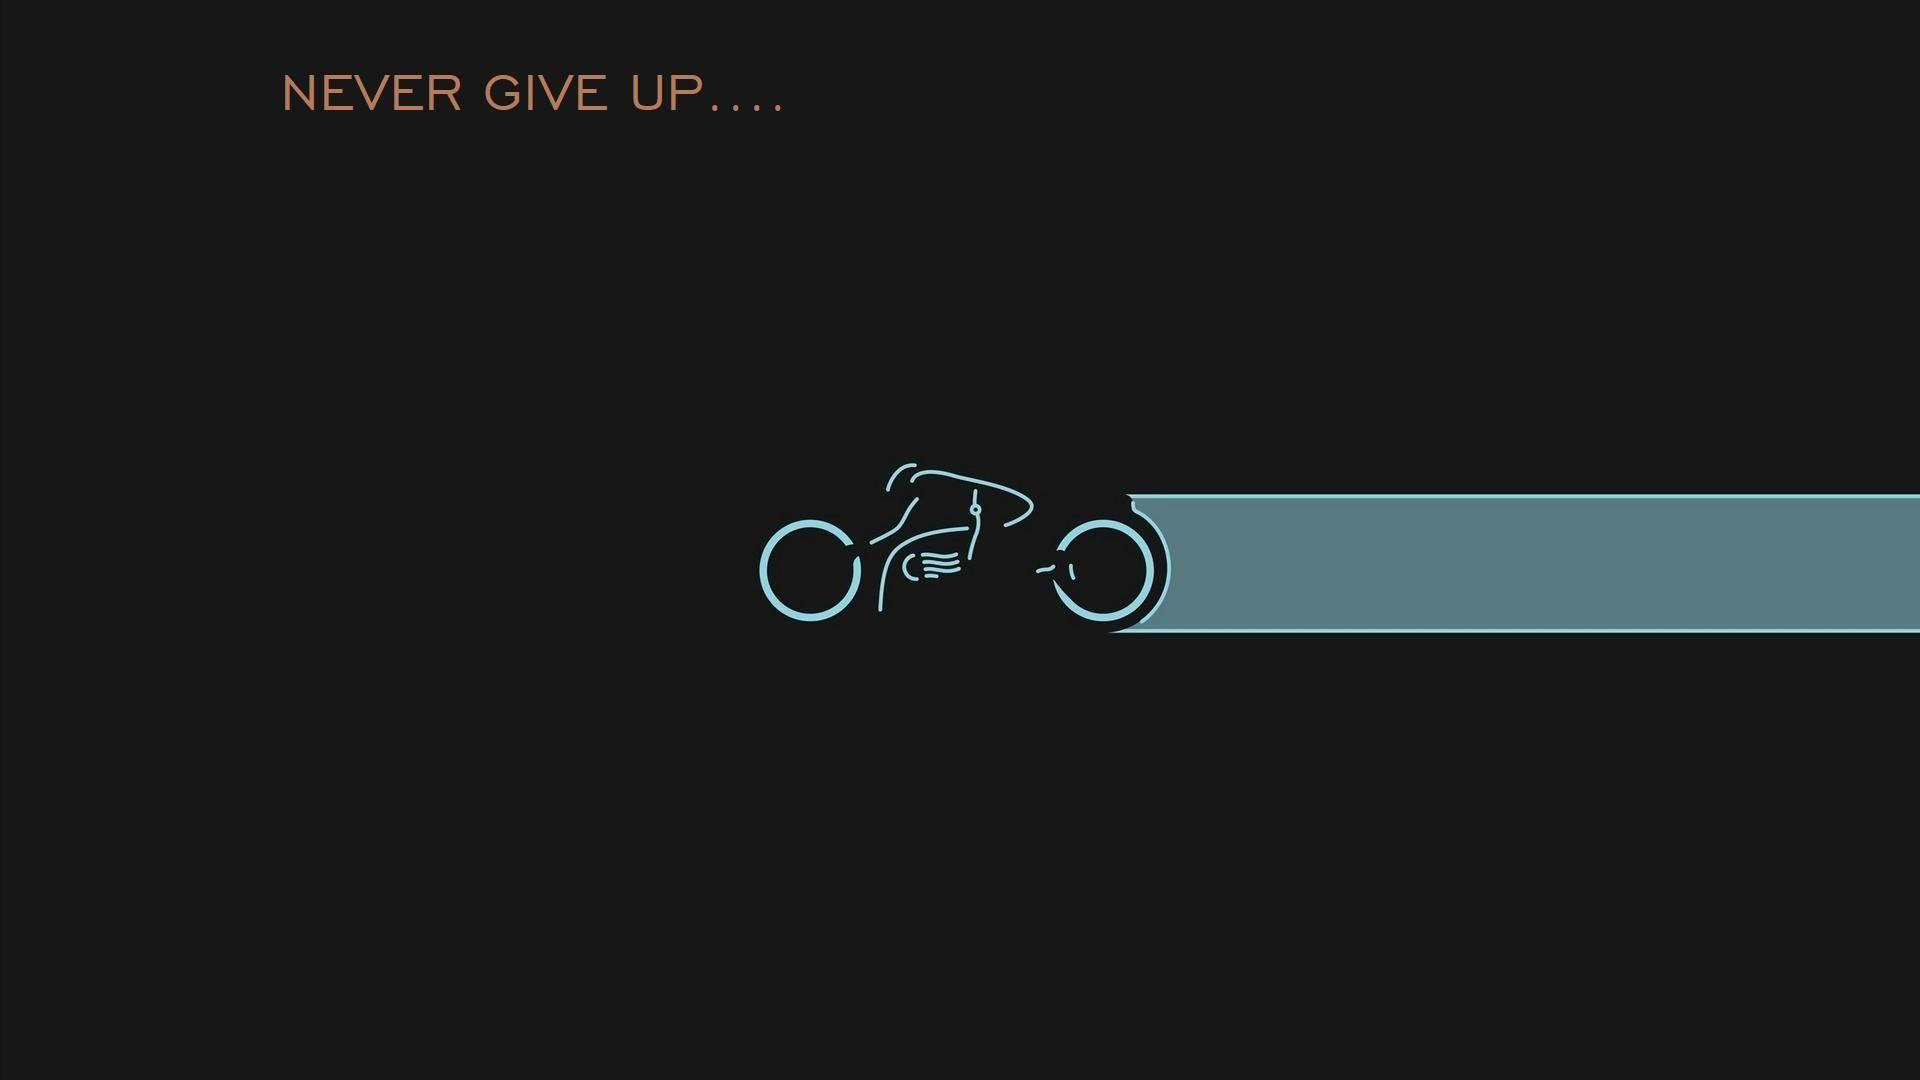 Perseverance In Motion - Never Give Up Background